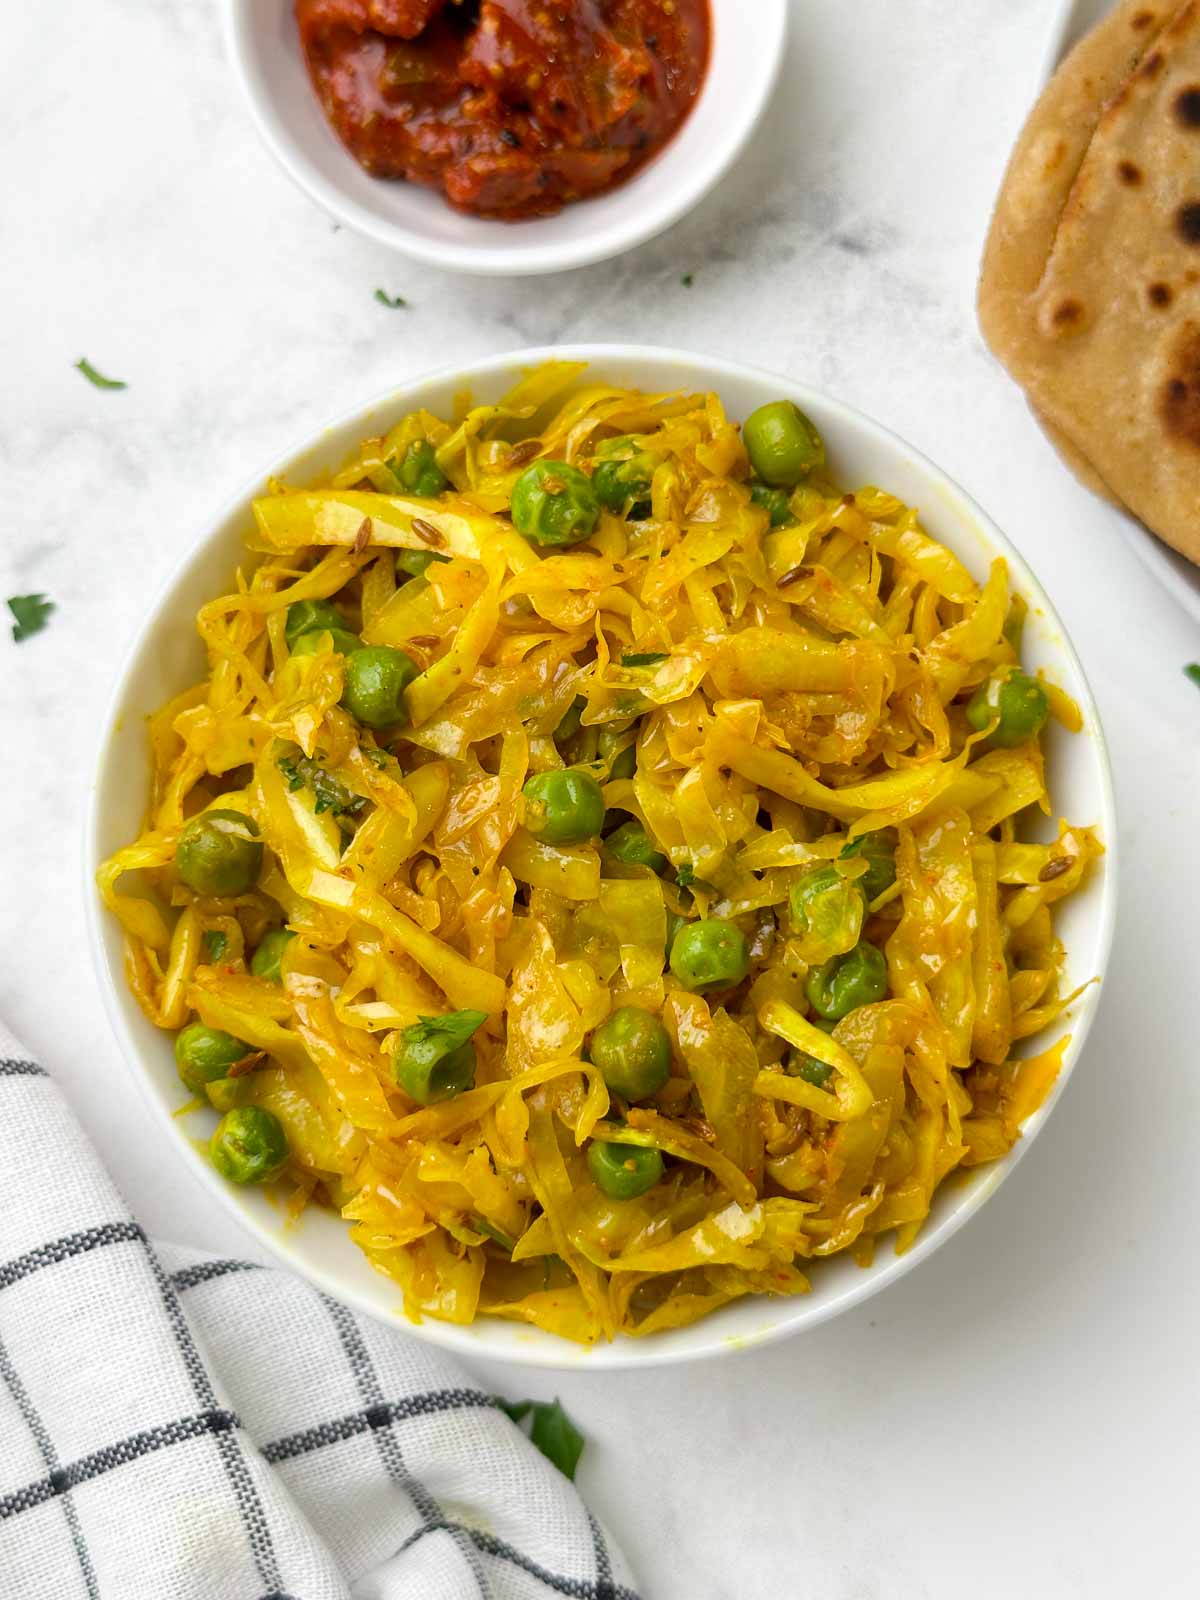 cabbage peas stir fry served in a bowl with paratha and pickle on the side